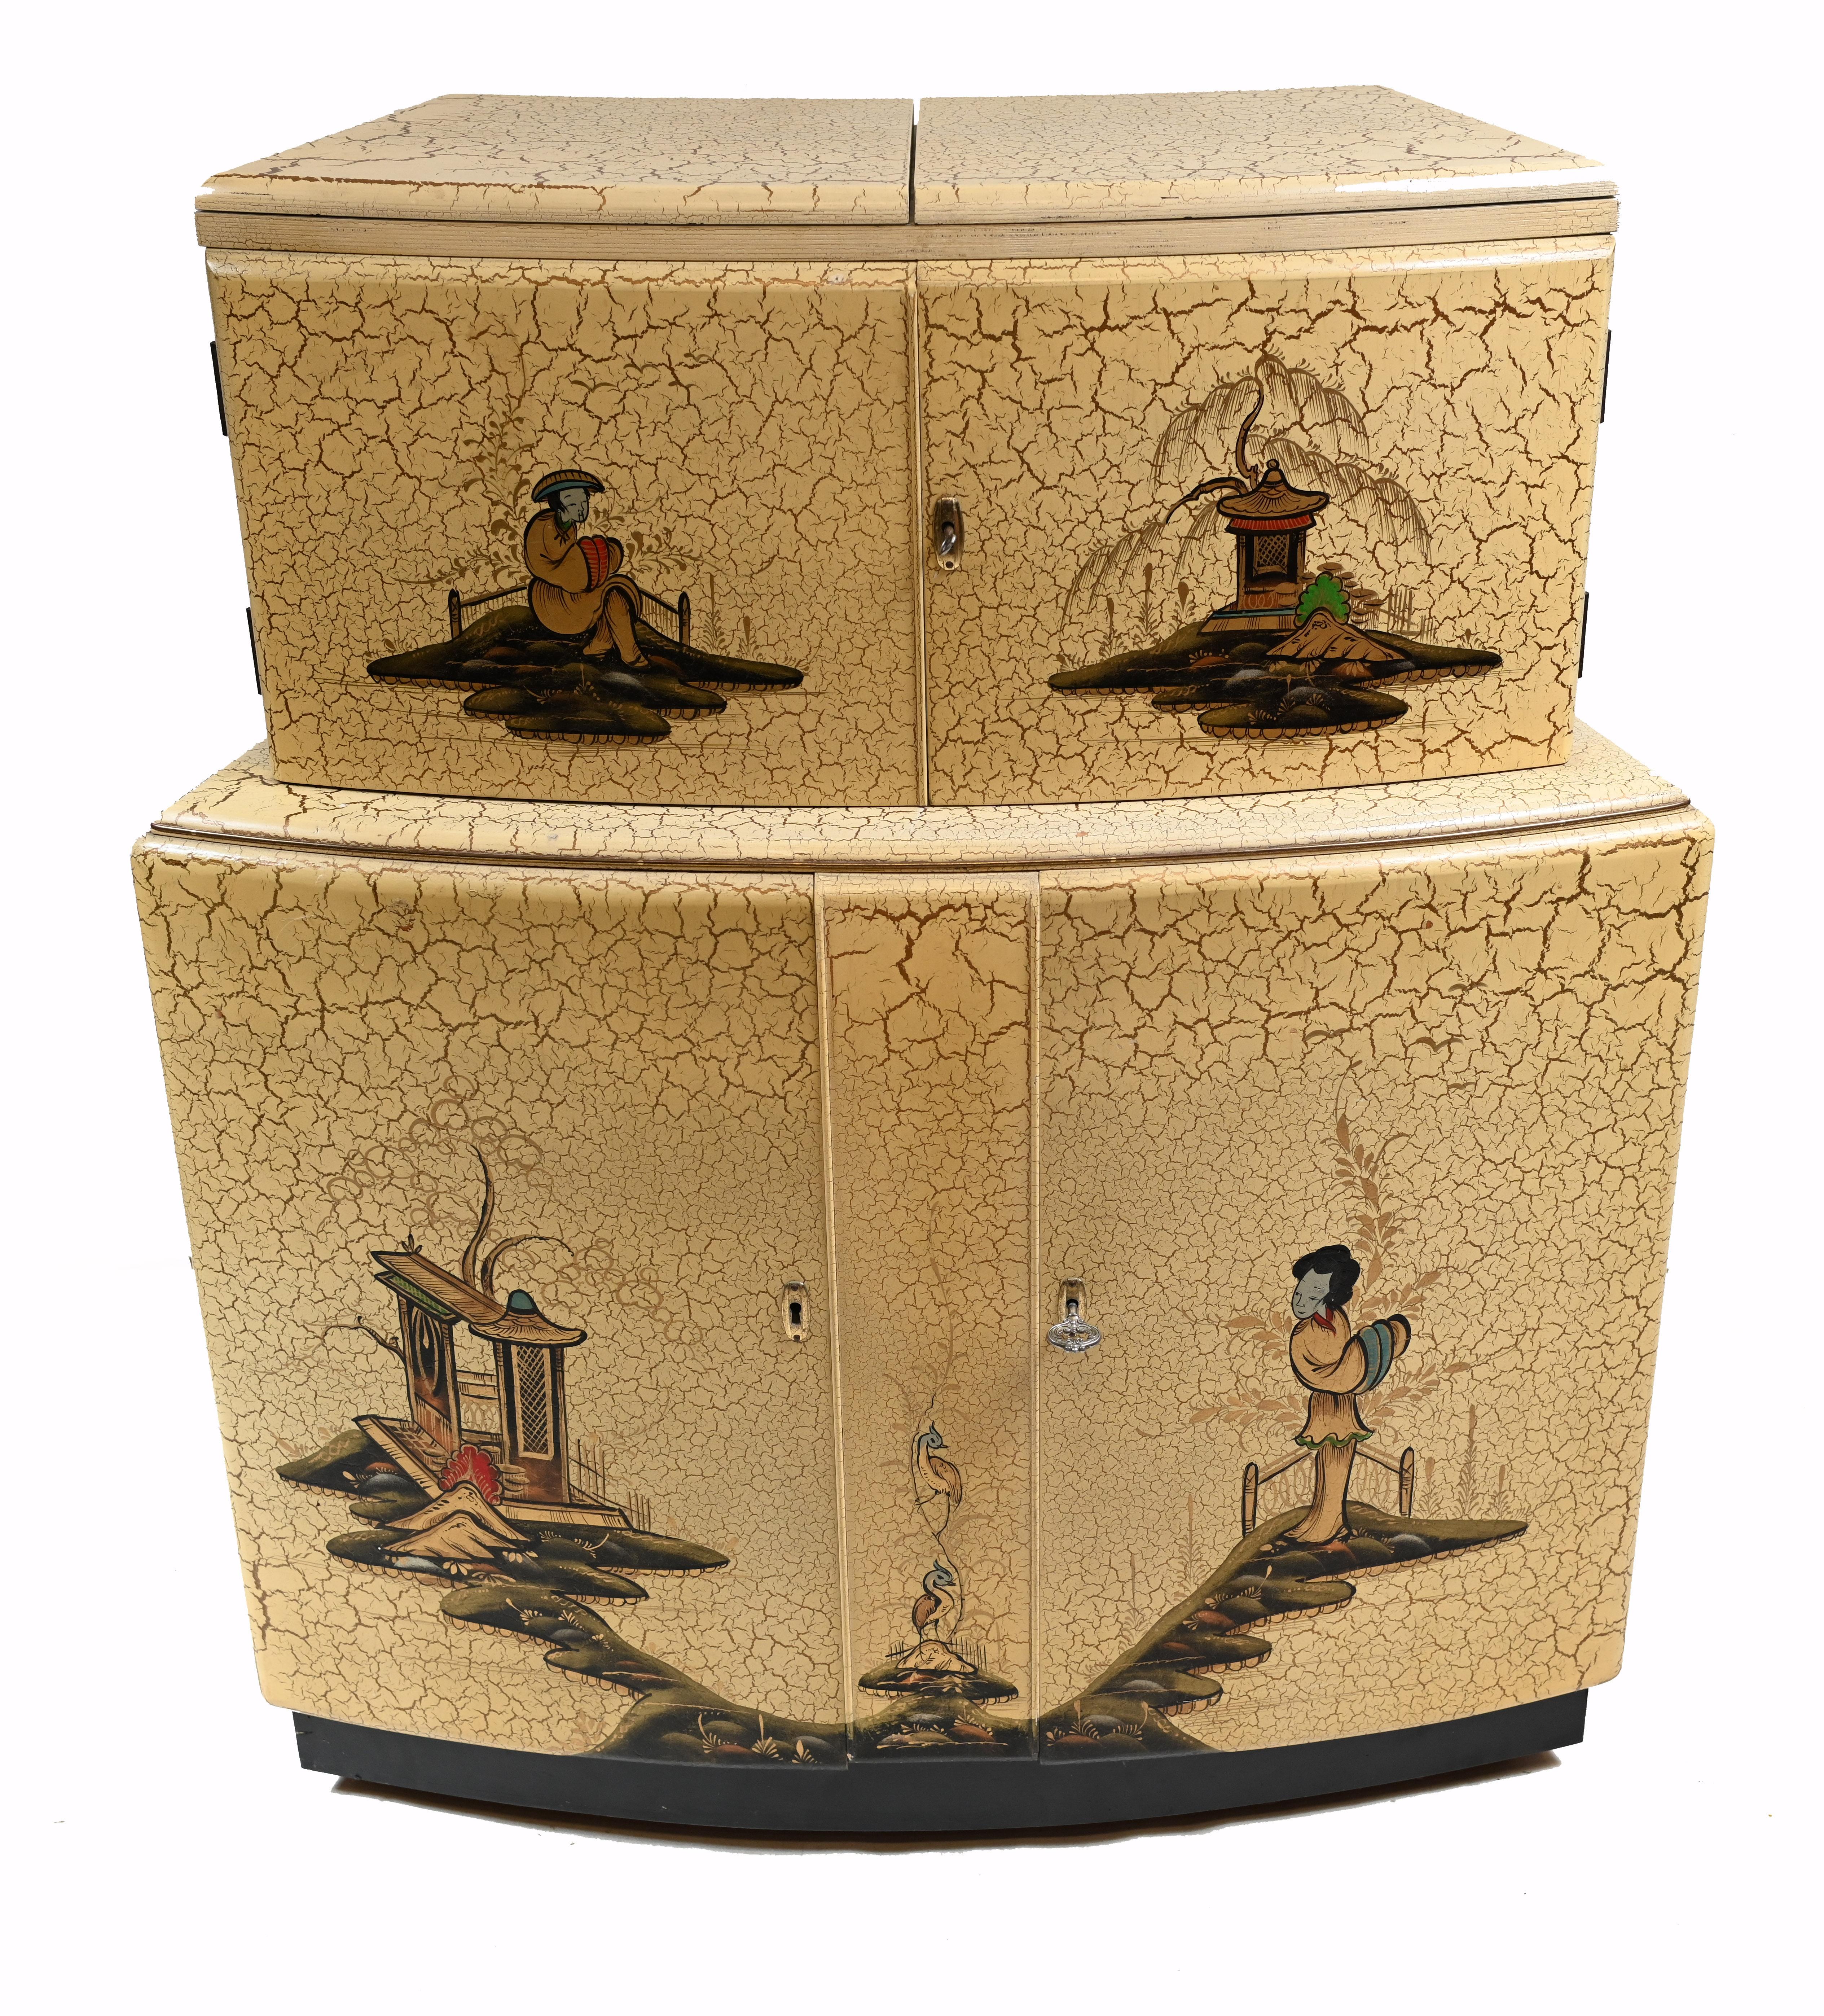 Gorgeous vintage 1930s Art Deco cocktail cabinet
An unusual cocktail cabinet decorated with Chinese figures and Chinoiserie with an off-white crackle finish.
Such a good look to this piece which opens out to reveal a wide bar area - perfect for a